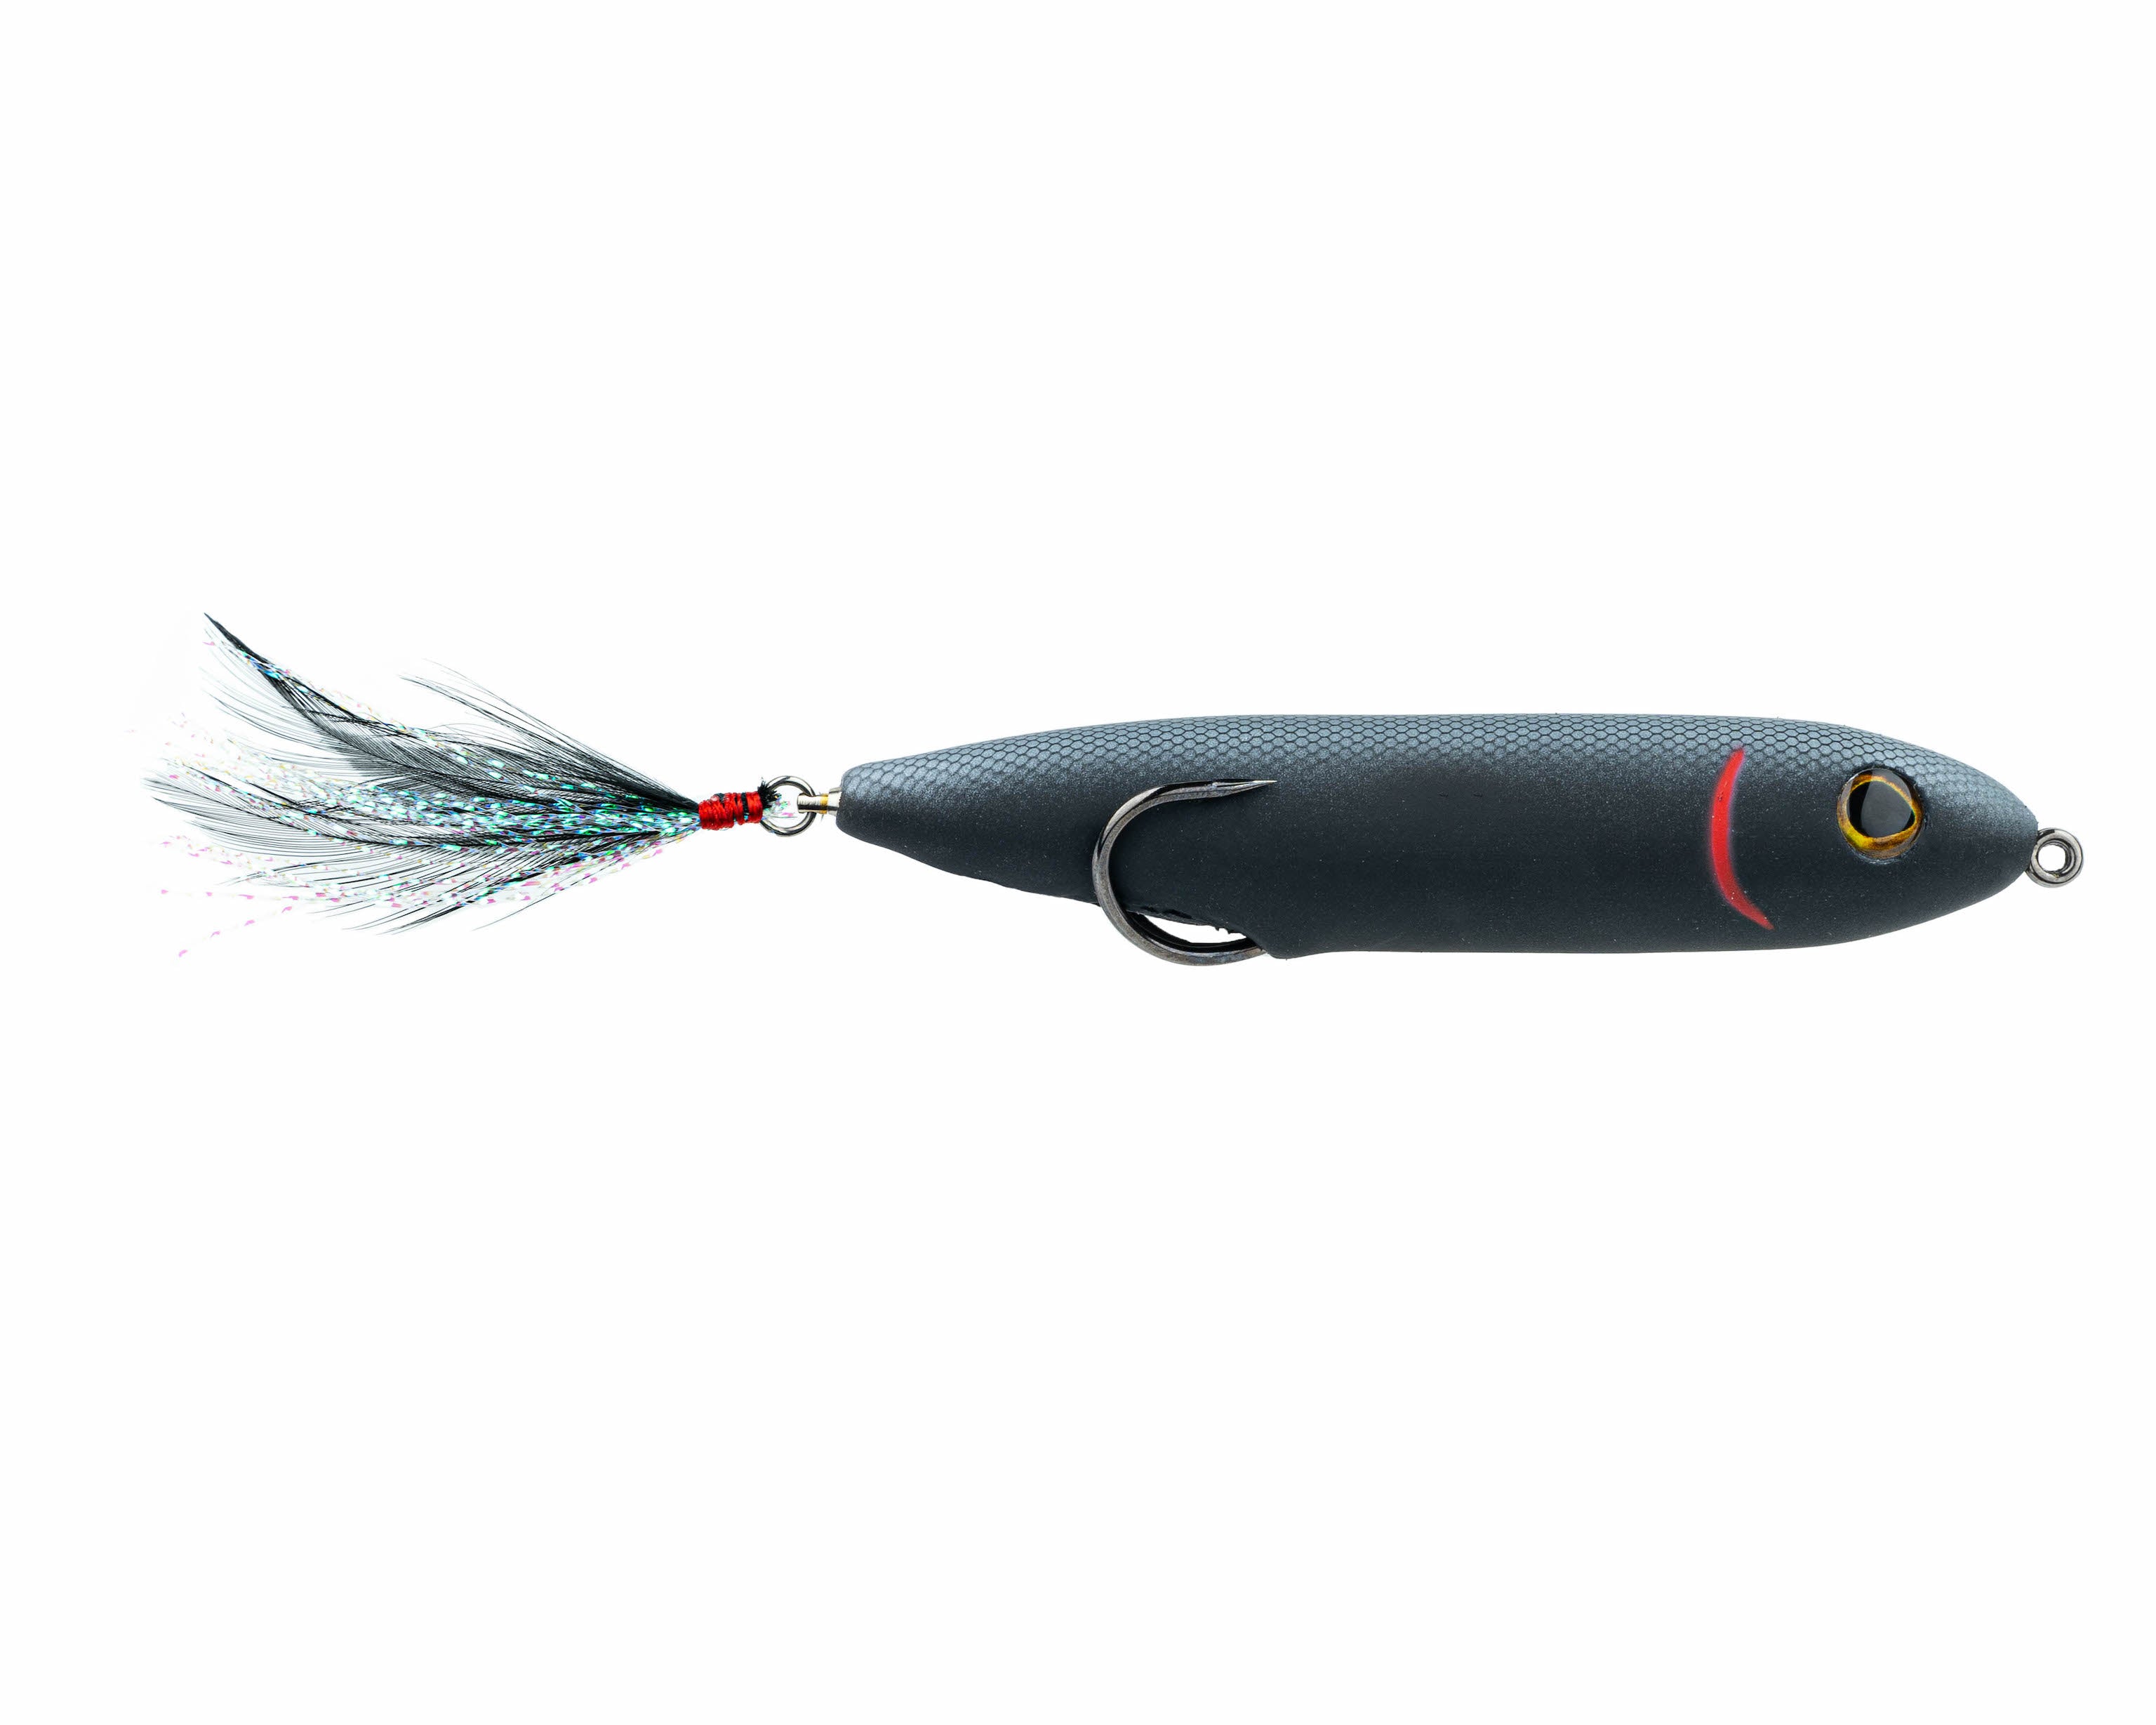  SNAG PROOF Zoo Pup Topwater Super Soft Hollow Body Lure